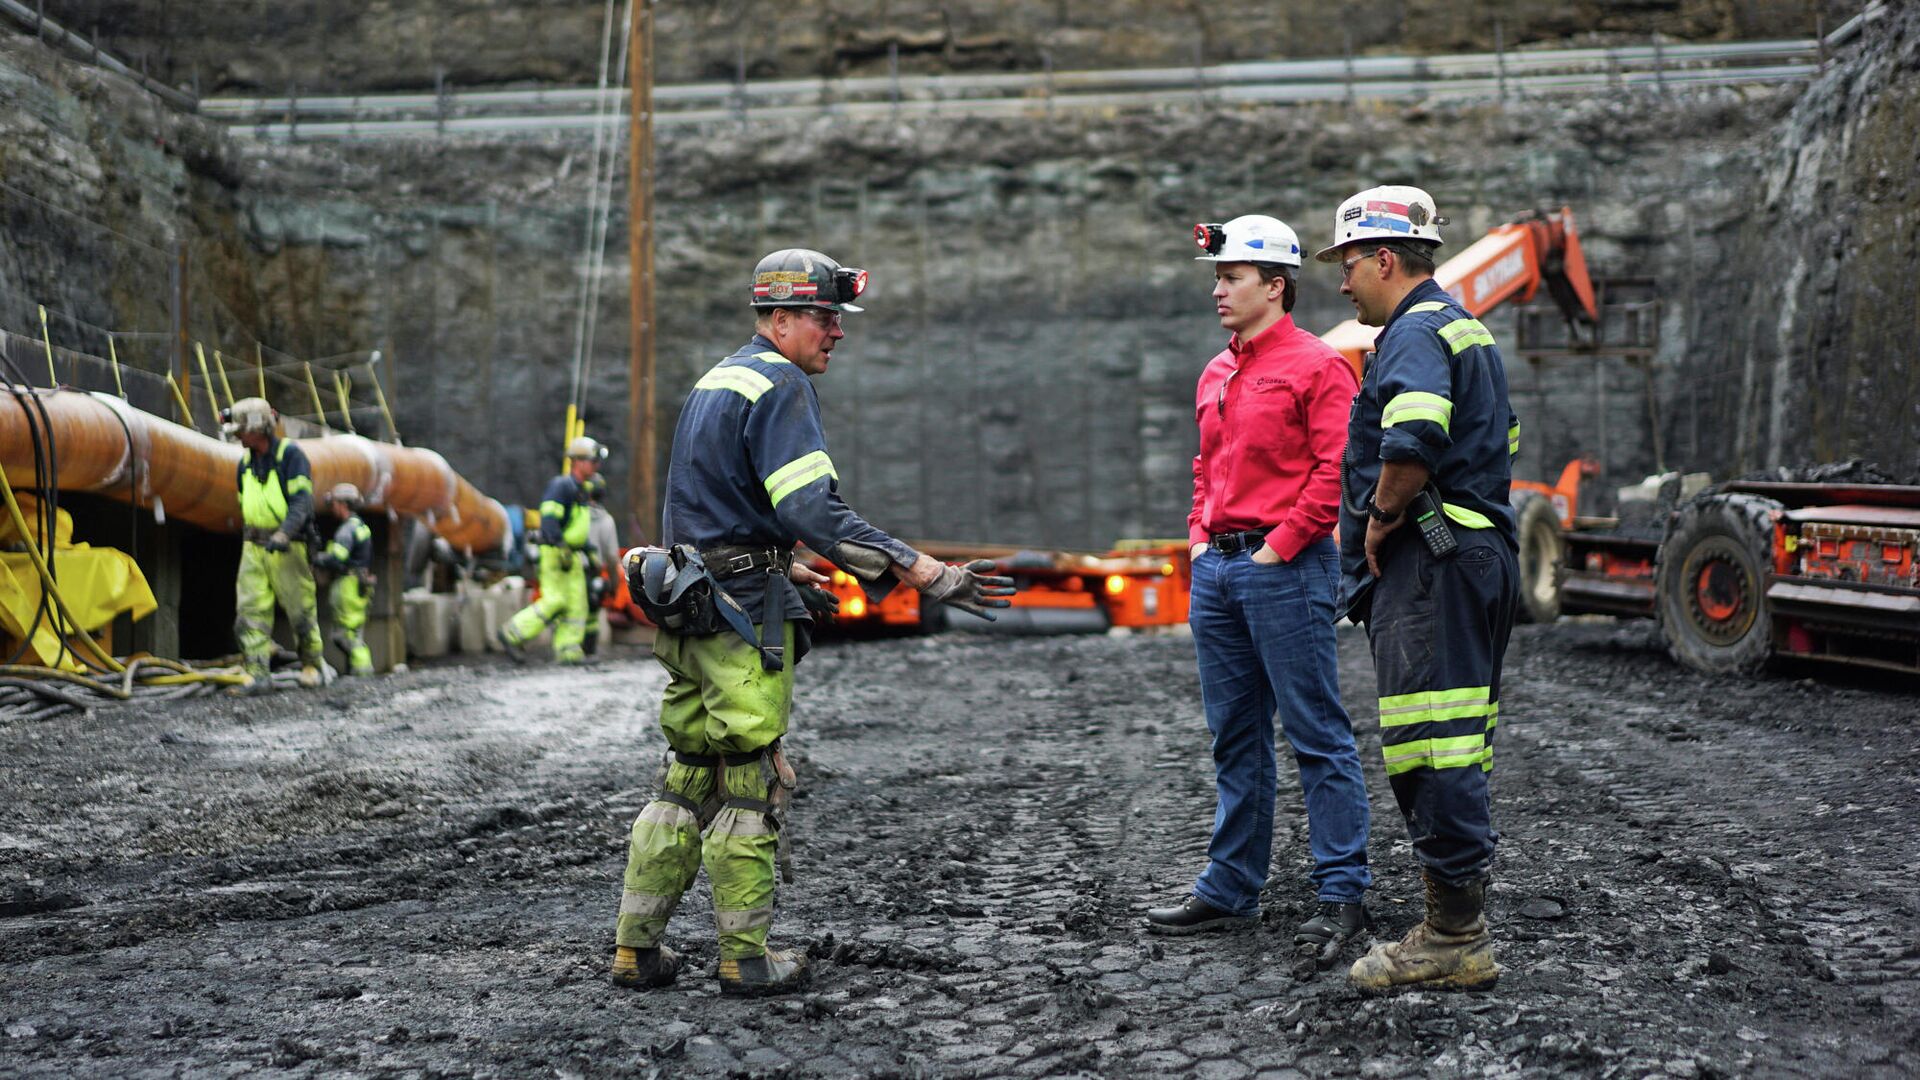 The CEO of Corsa, George Dethlefsen (centre) at a new coal mine in Pennslyvania in 2017 - Sputnik International, 1920, 08.11.2021